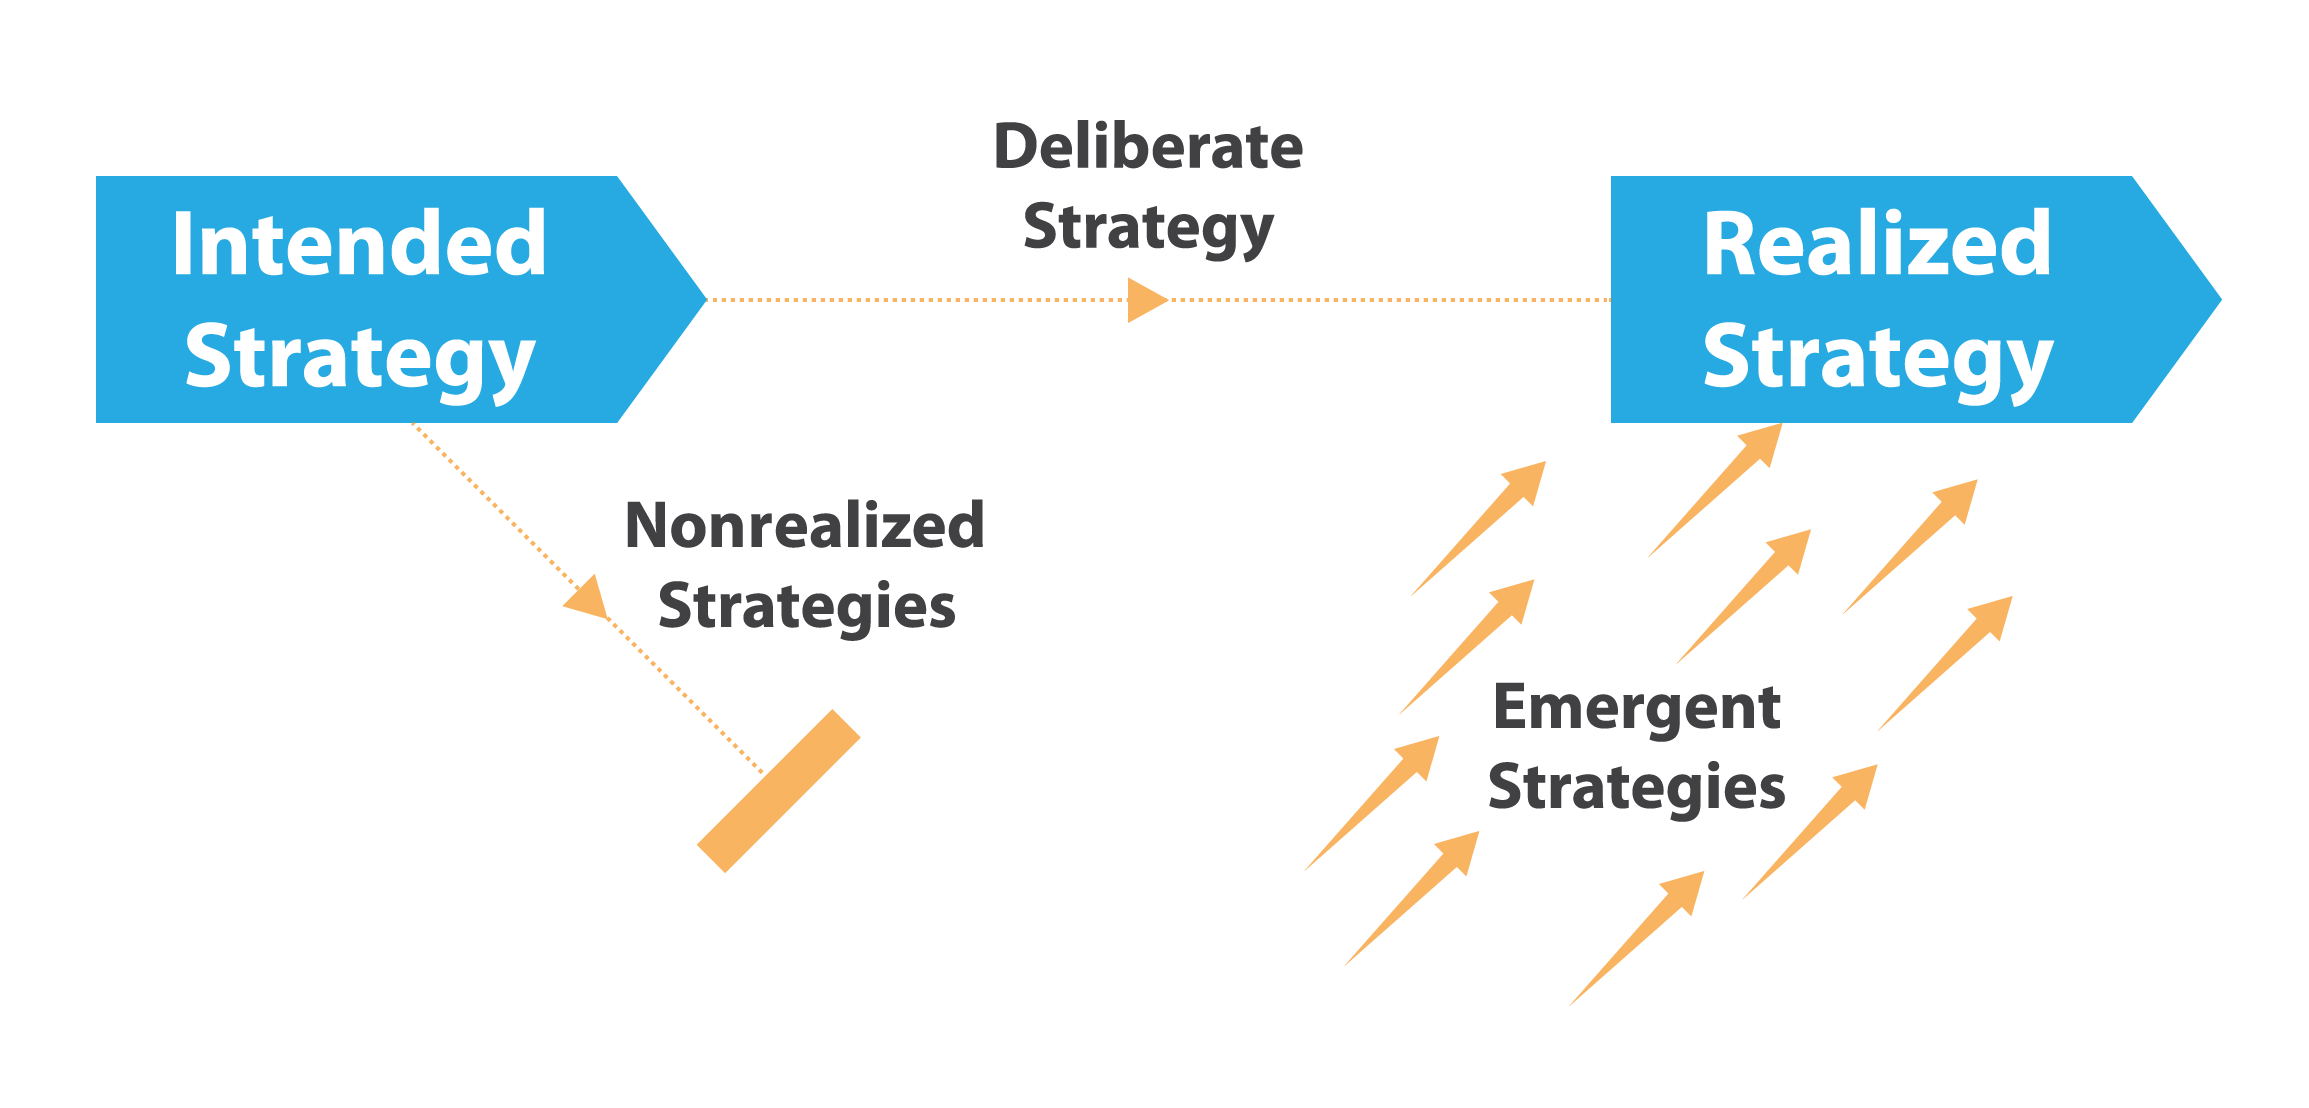 Intended, Deliberate, and Realized Strategies. Image description available